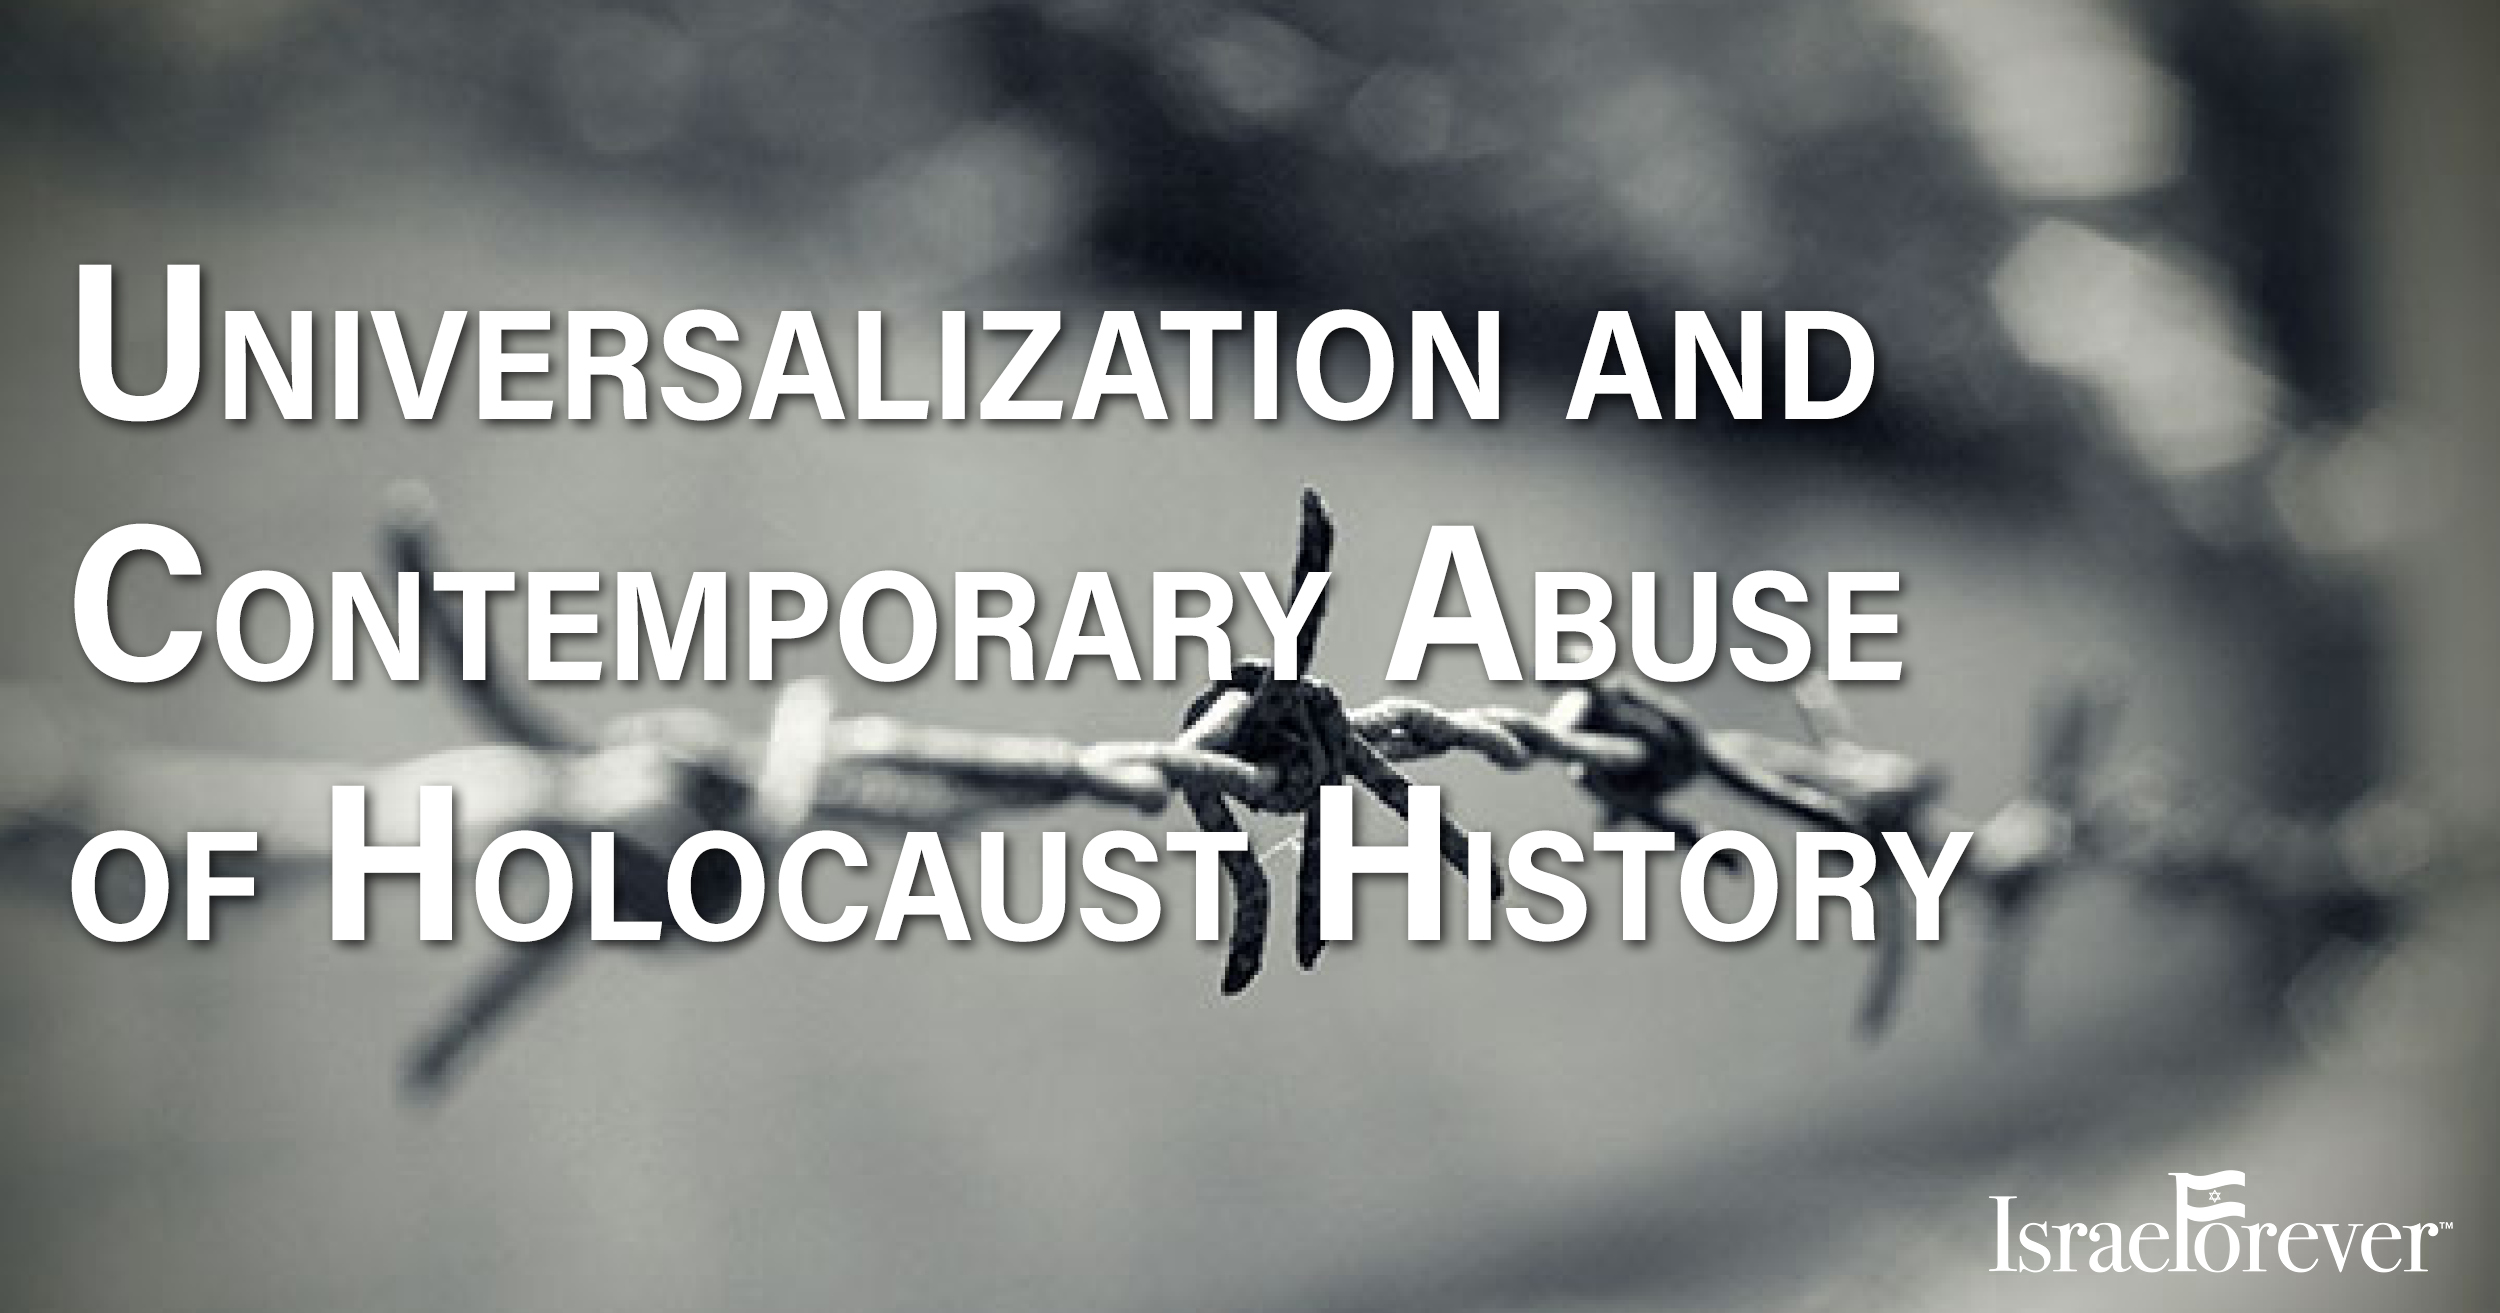 The Universalization and Contemporary Abuse of Holocaust History